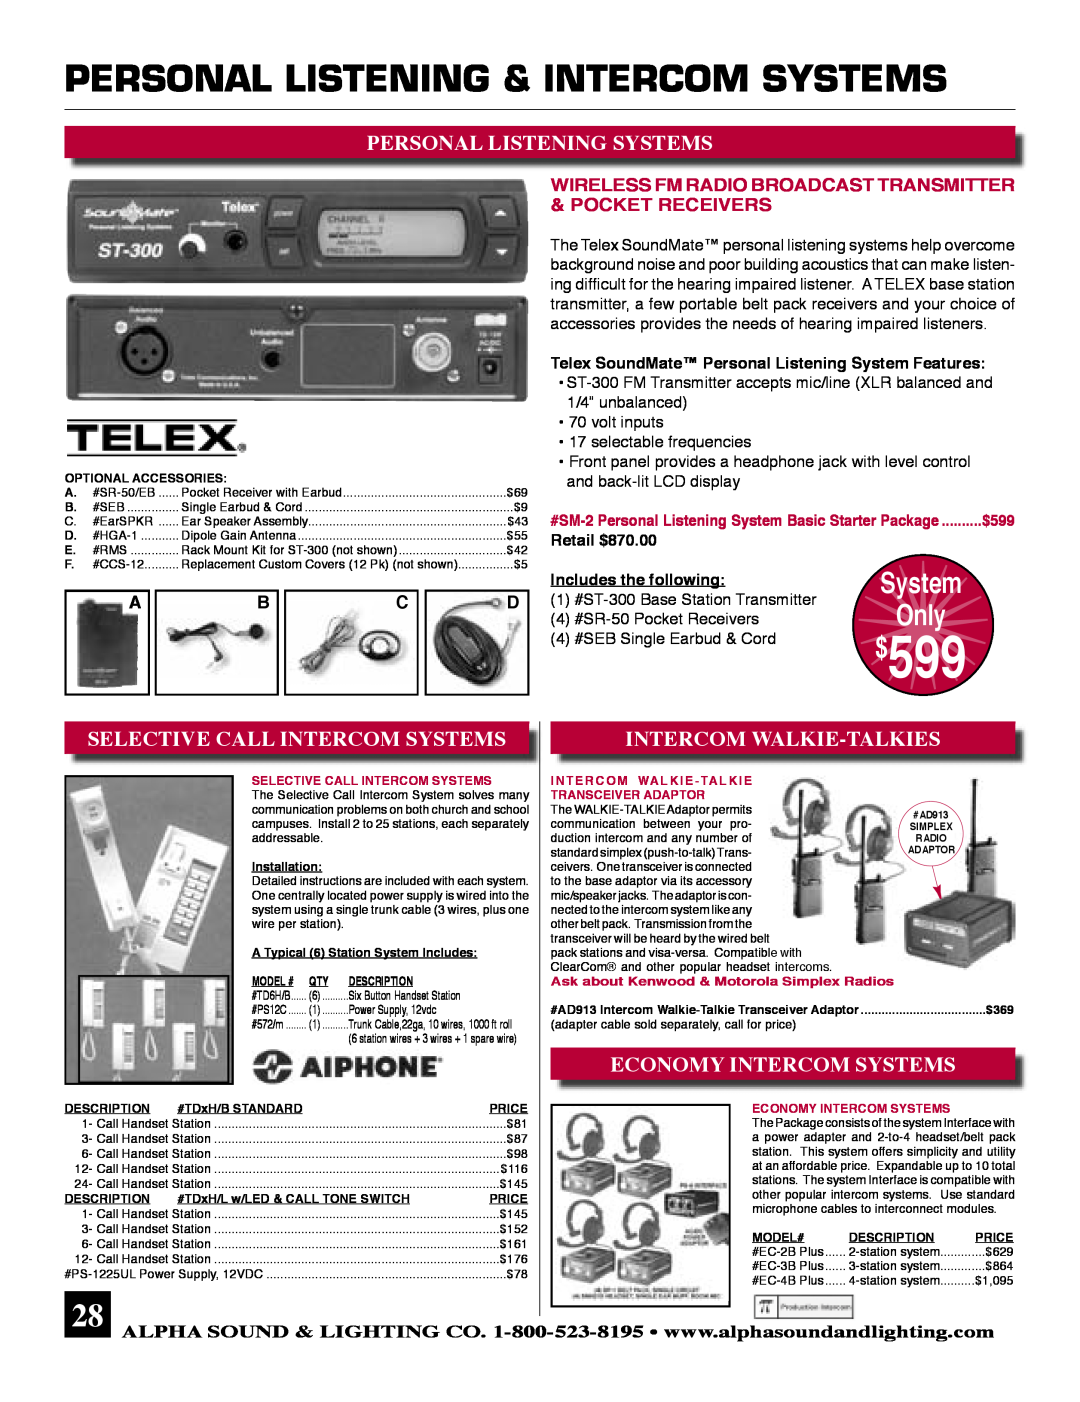 Ultimate Products JRX125, 37885B Personal Listening & Intercom Systems, Retail $870.00, Includes the following, $599 